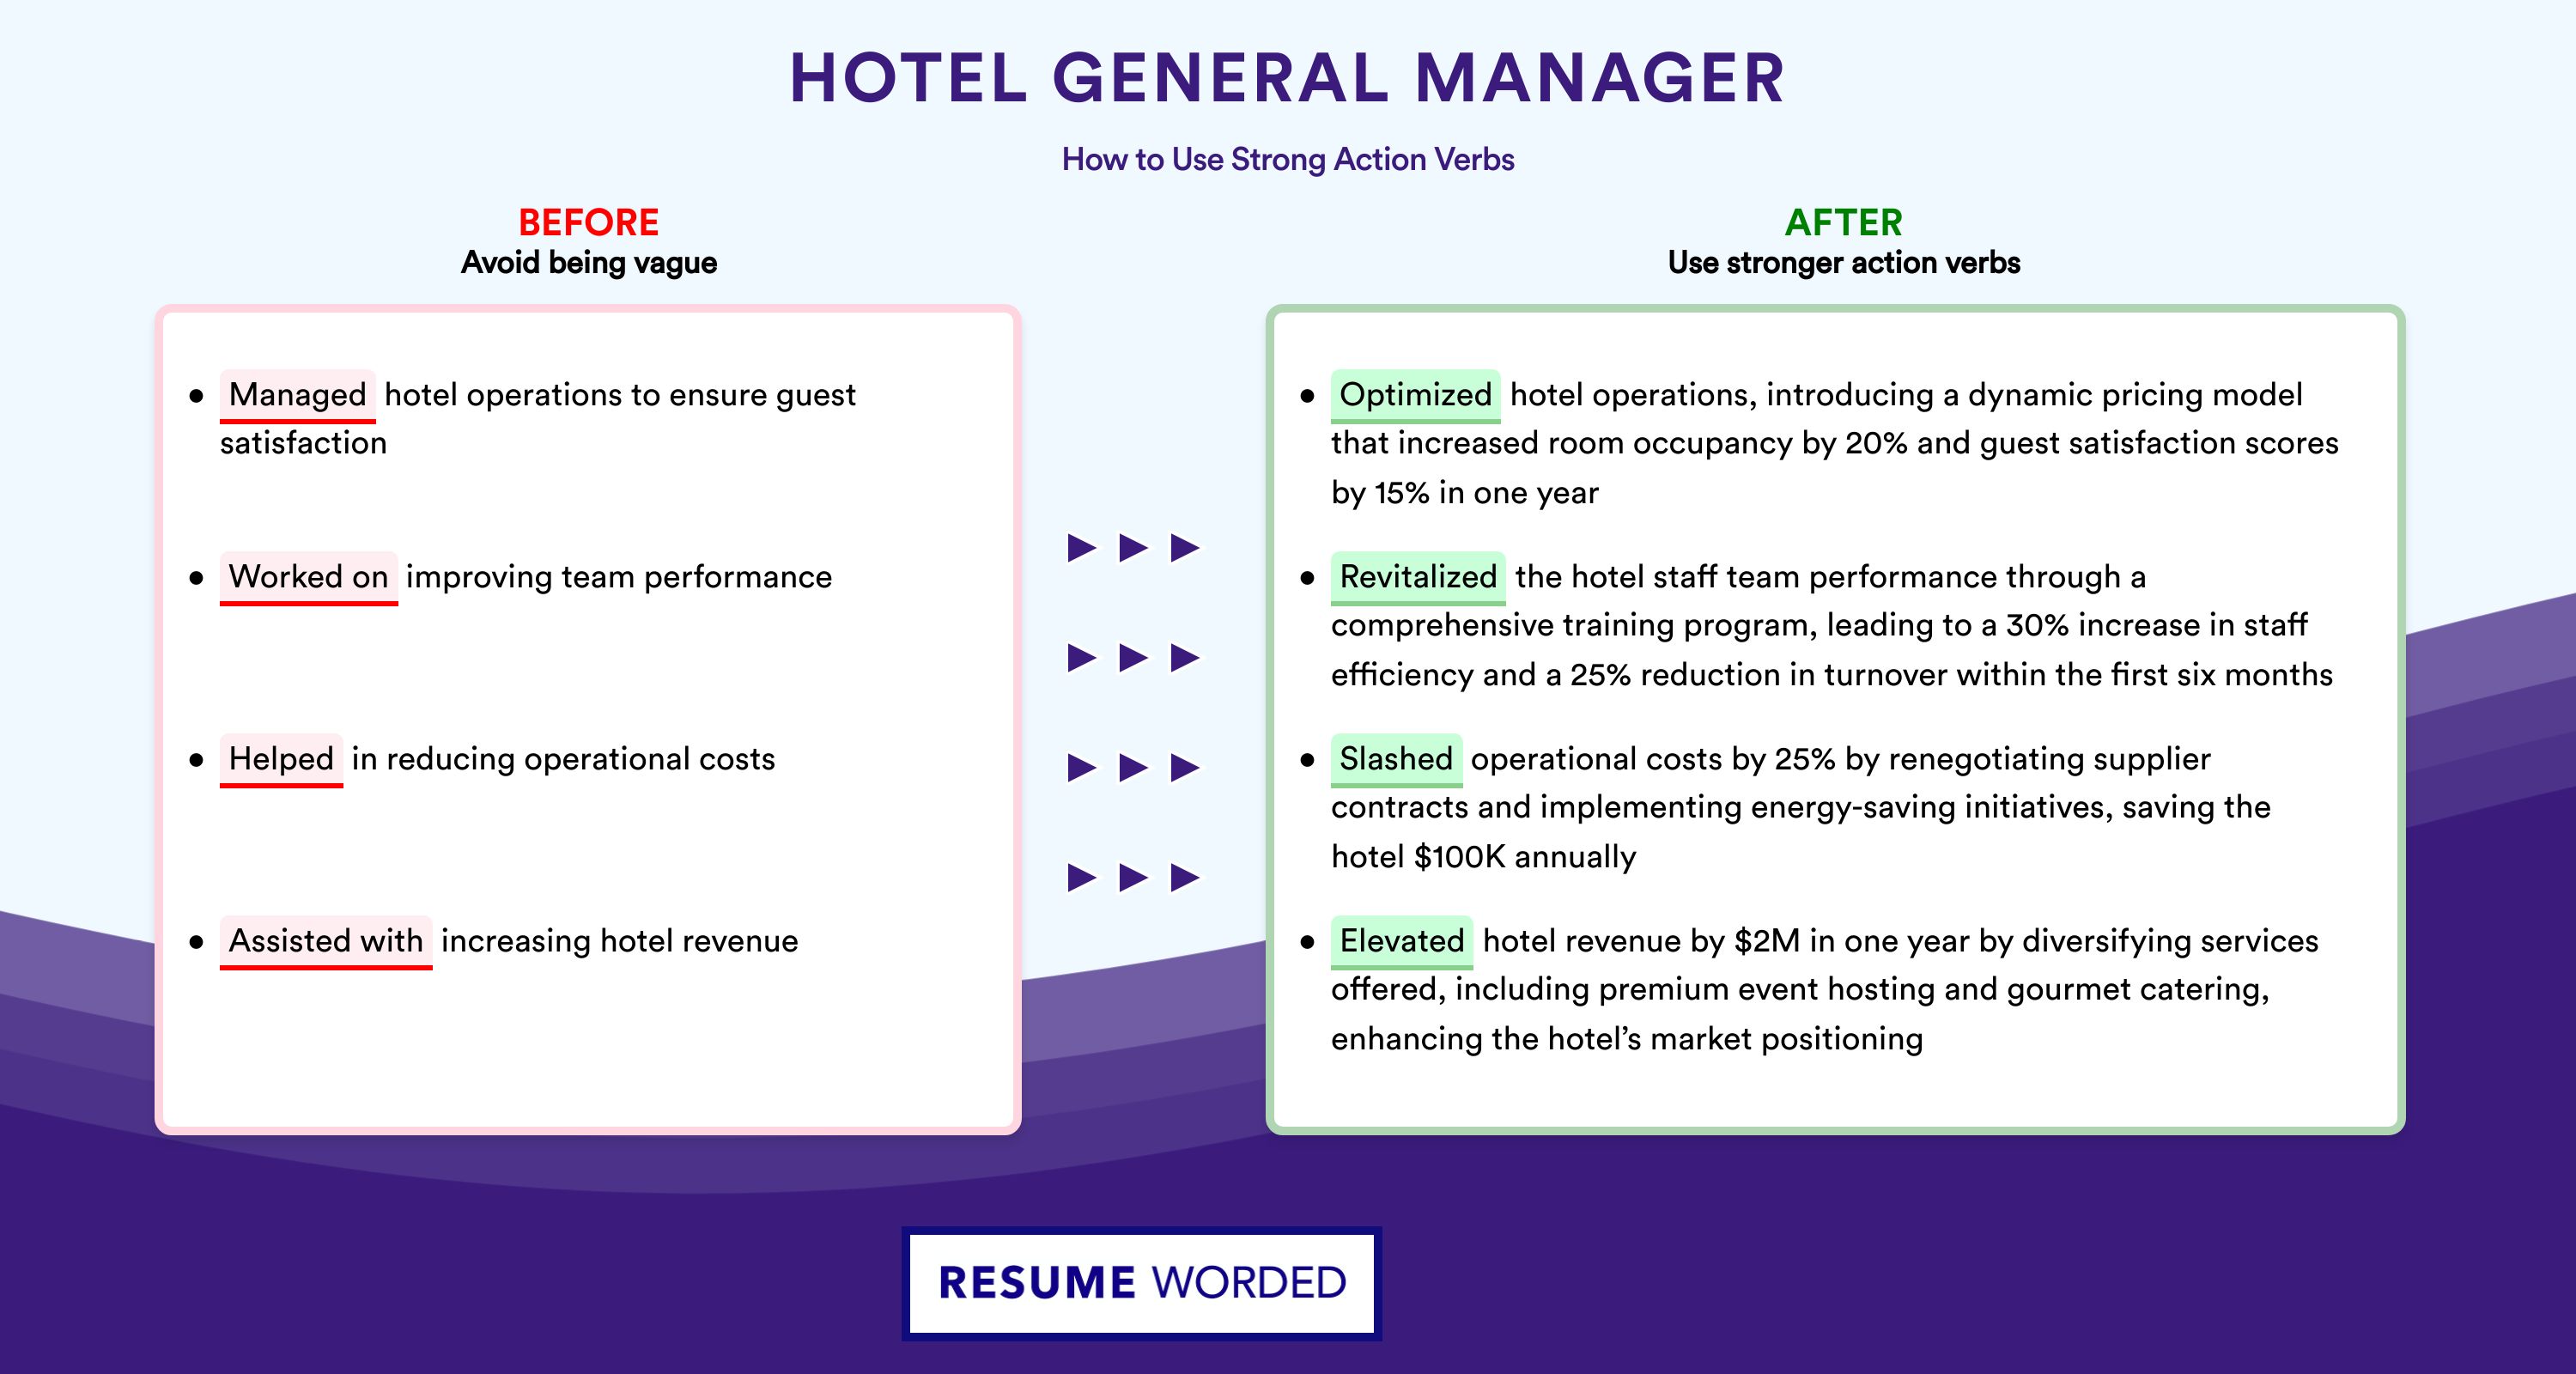 Action Verbs for Hotel General Manager